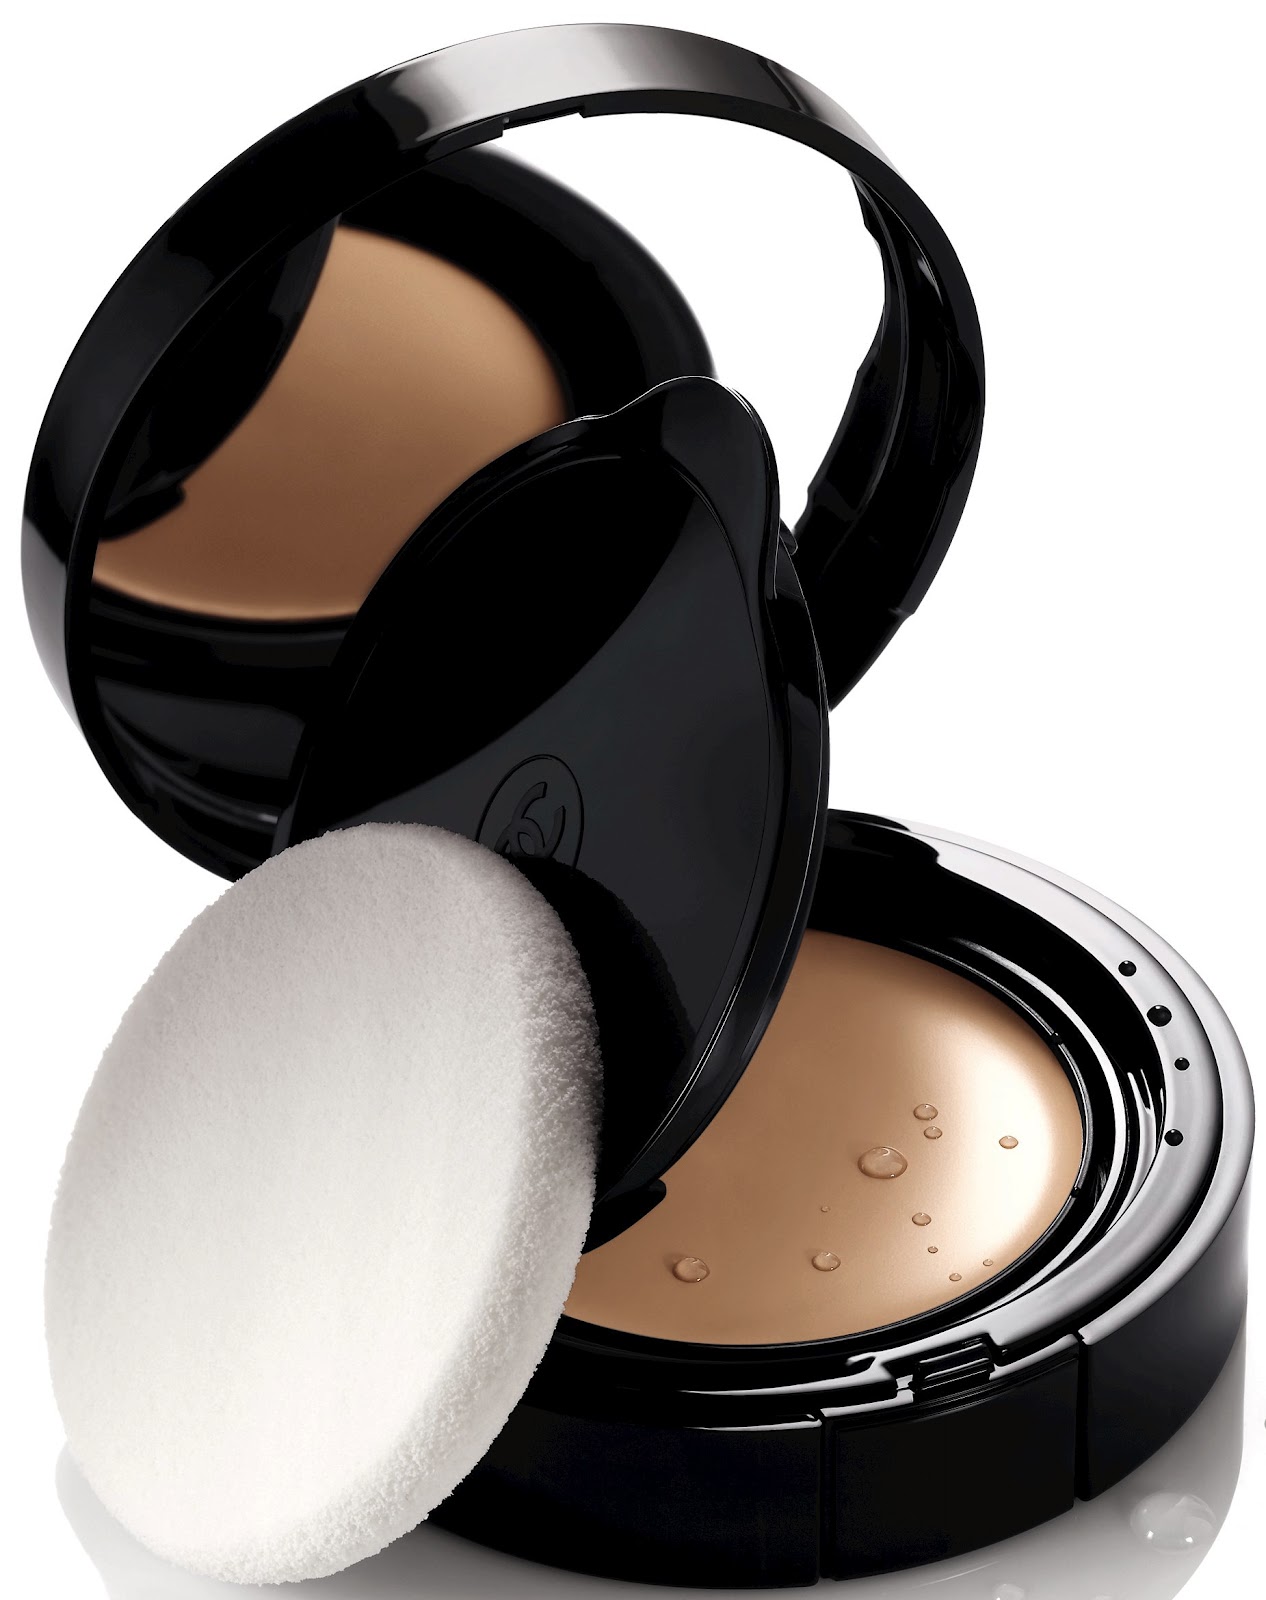 Chanel Perfection Lumière Foundation in Beige 30 - The Beauty Look Book